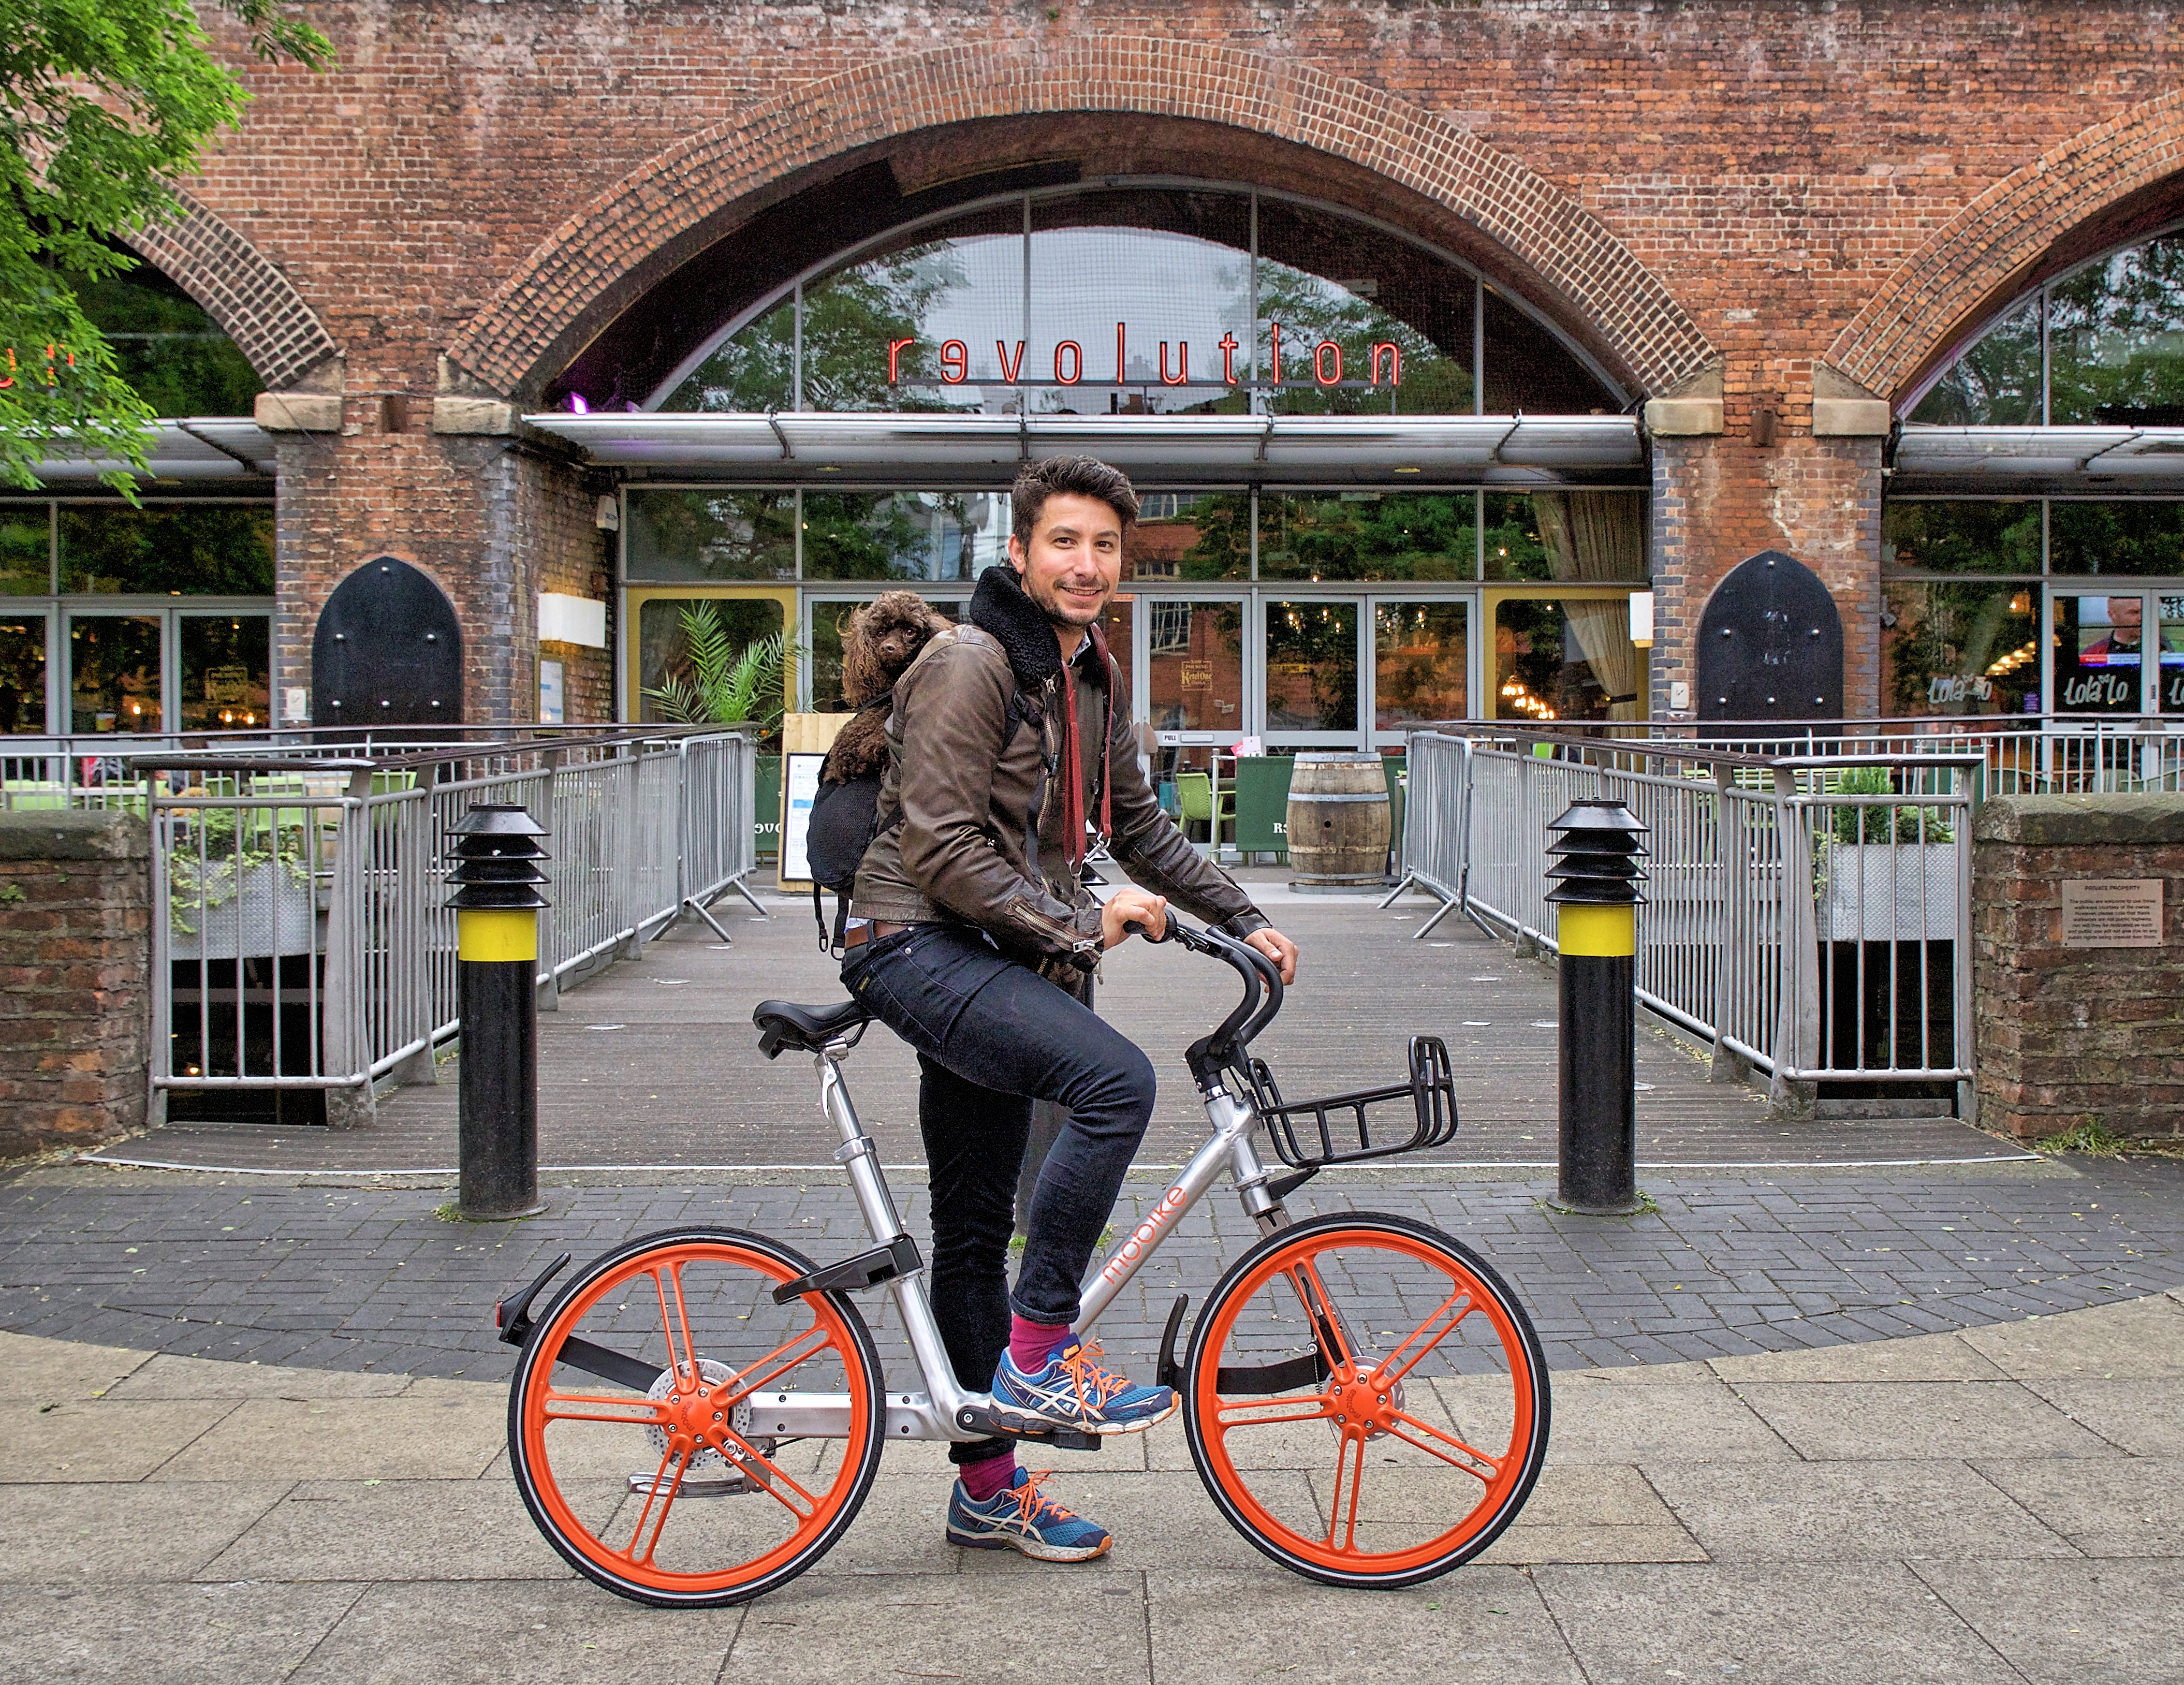 The silver and orange bikes are designed to be maintenance-free and last four years